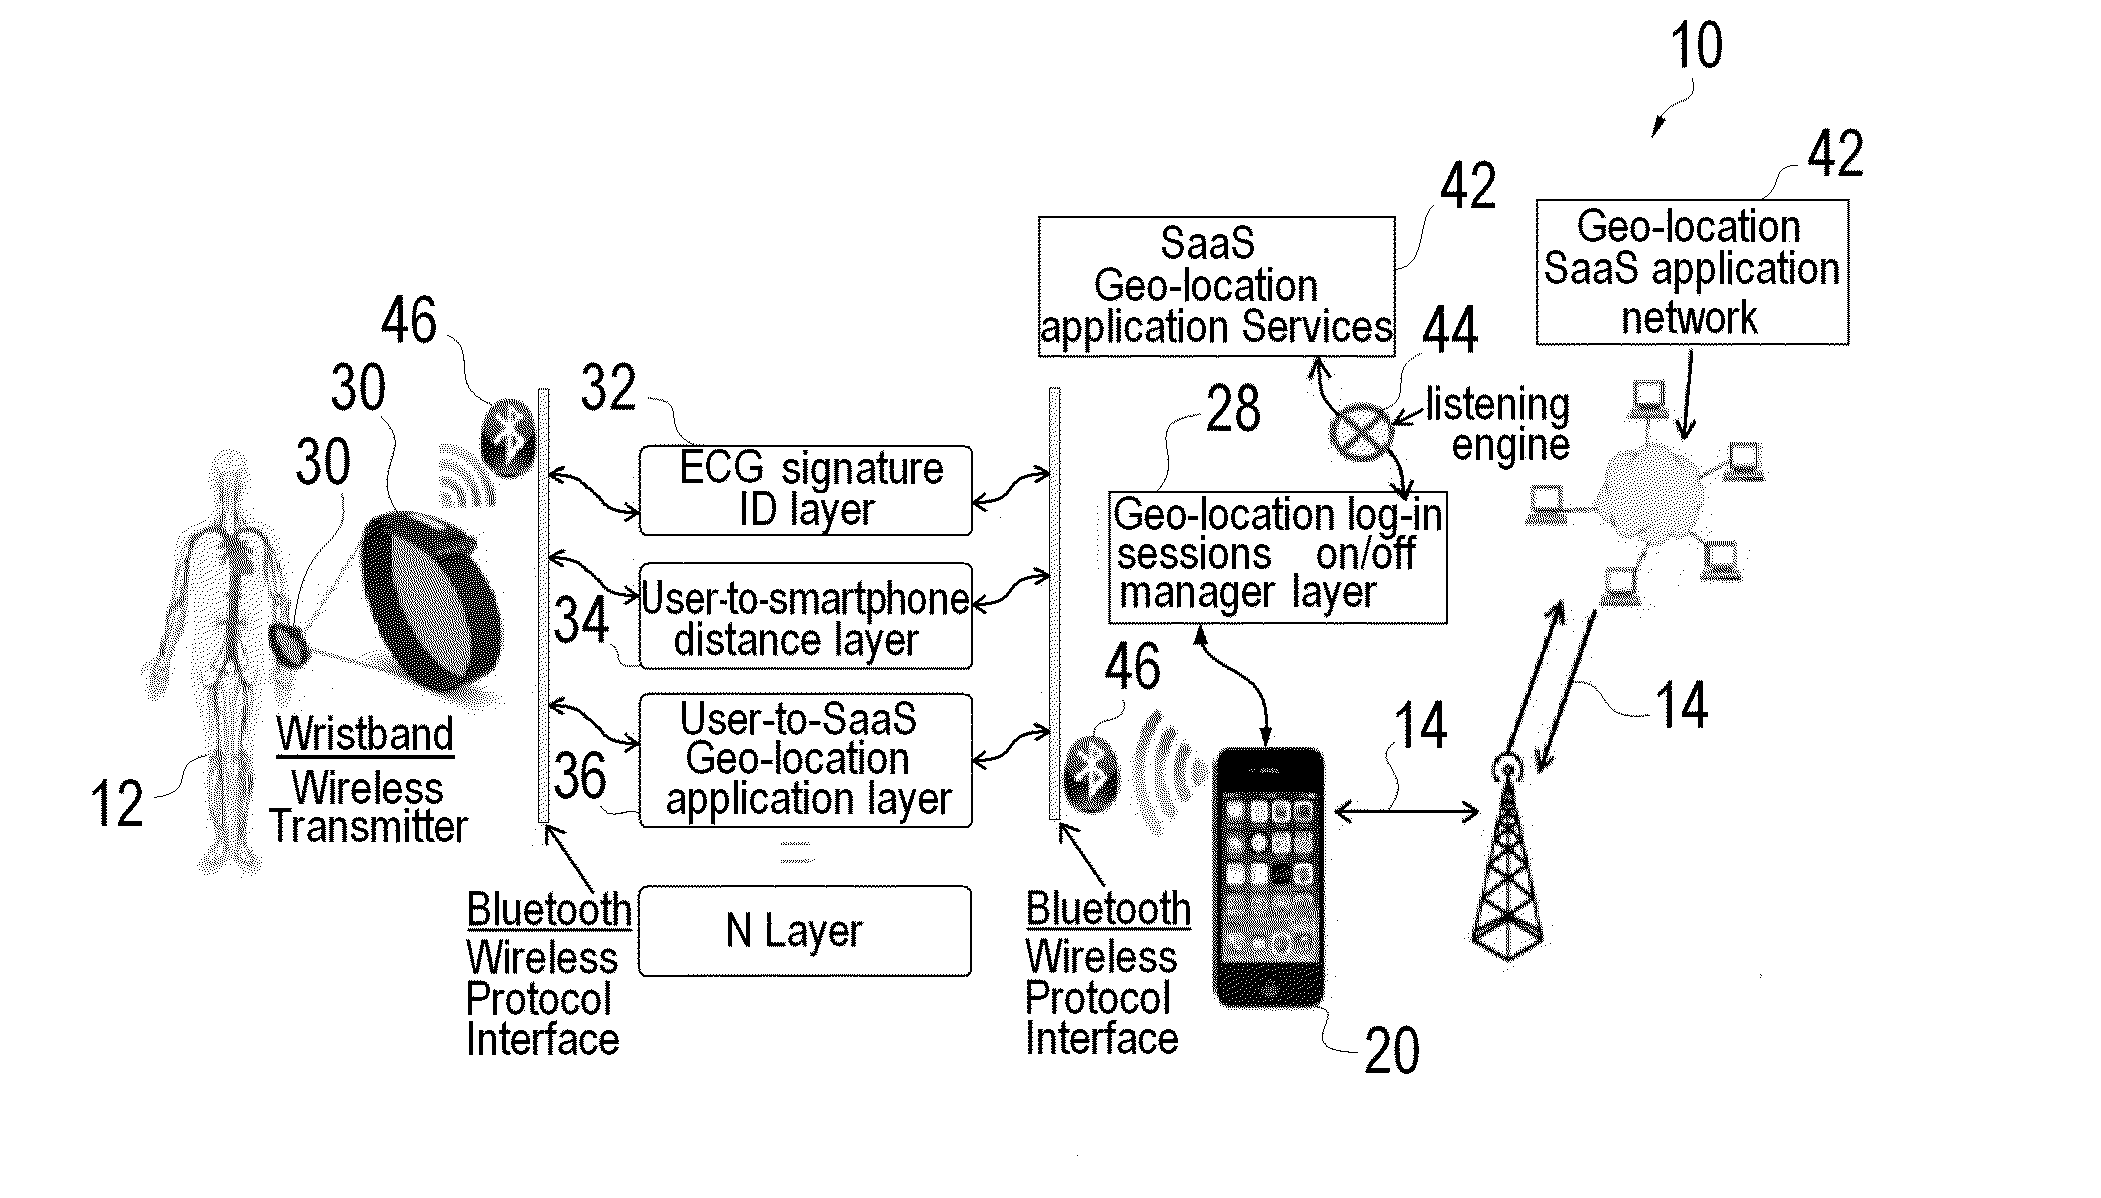 Method and System for Authenticating an Individual's Geo-Location Via a Communication Network and Applications Using the Same